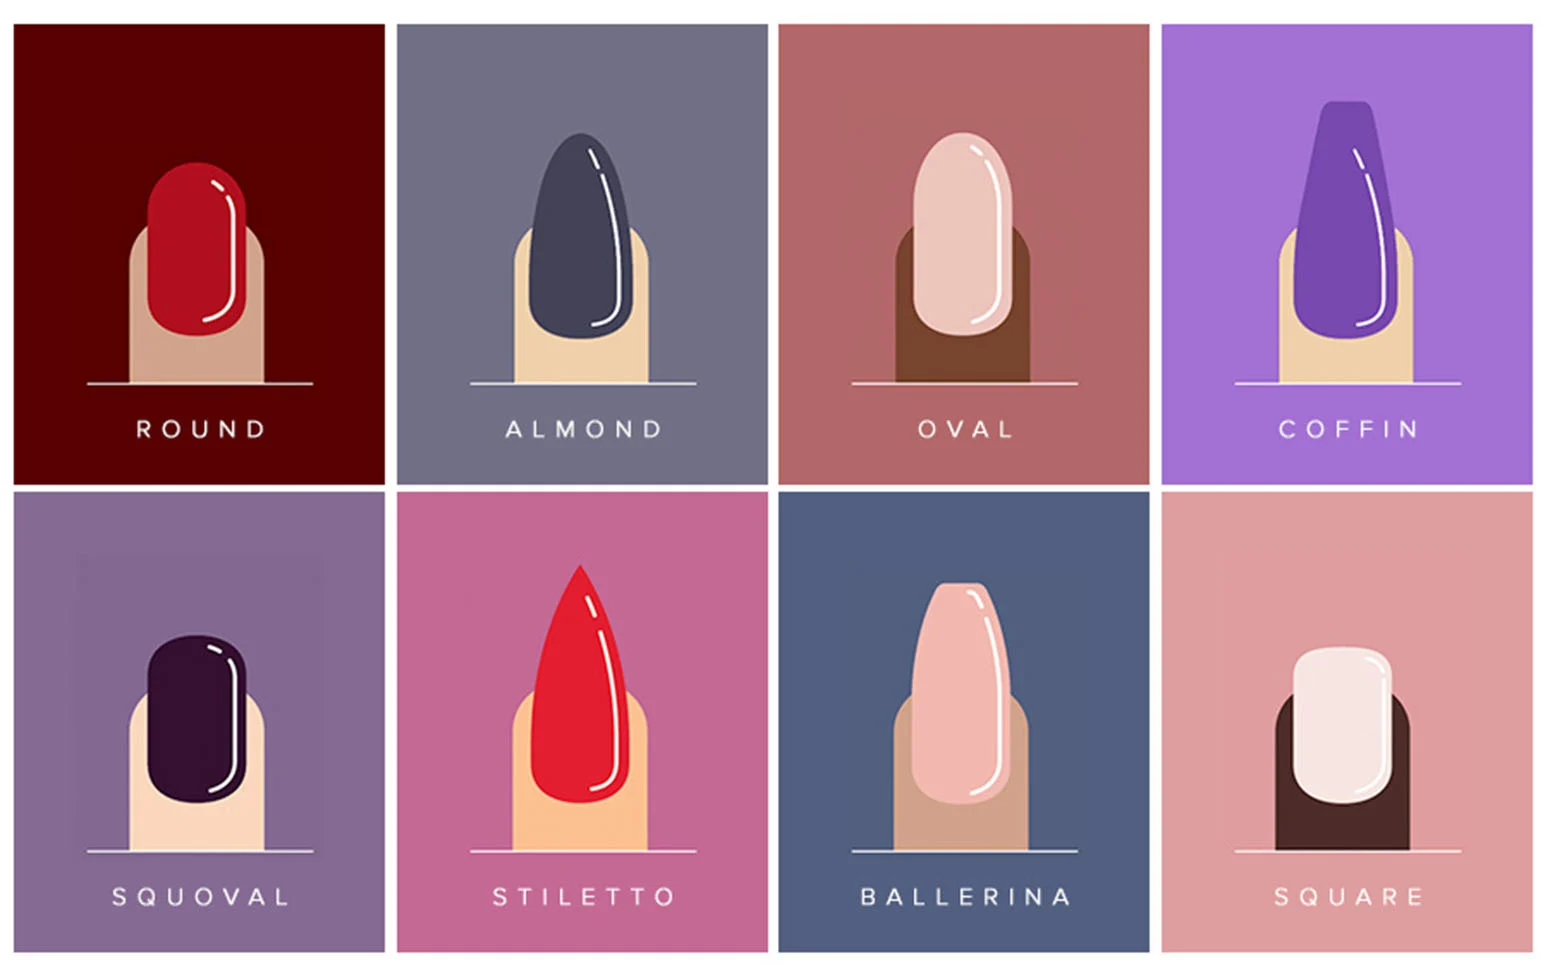 How to Find the Best Nail Shape for your Hands - Blog